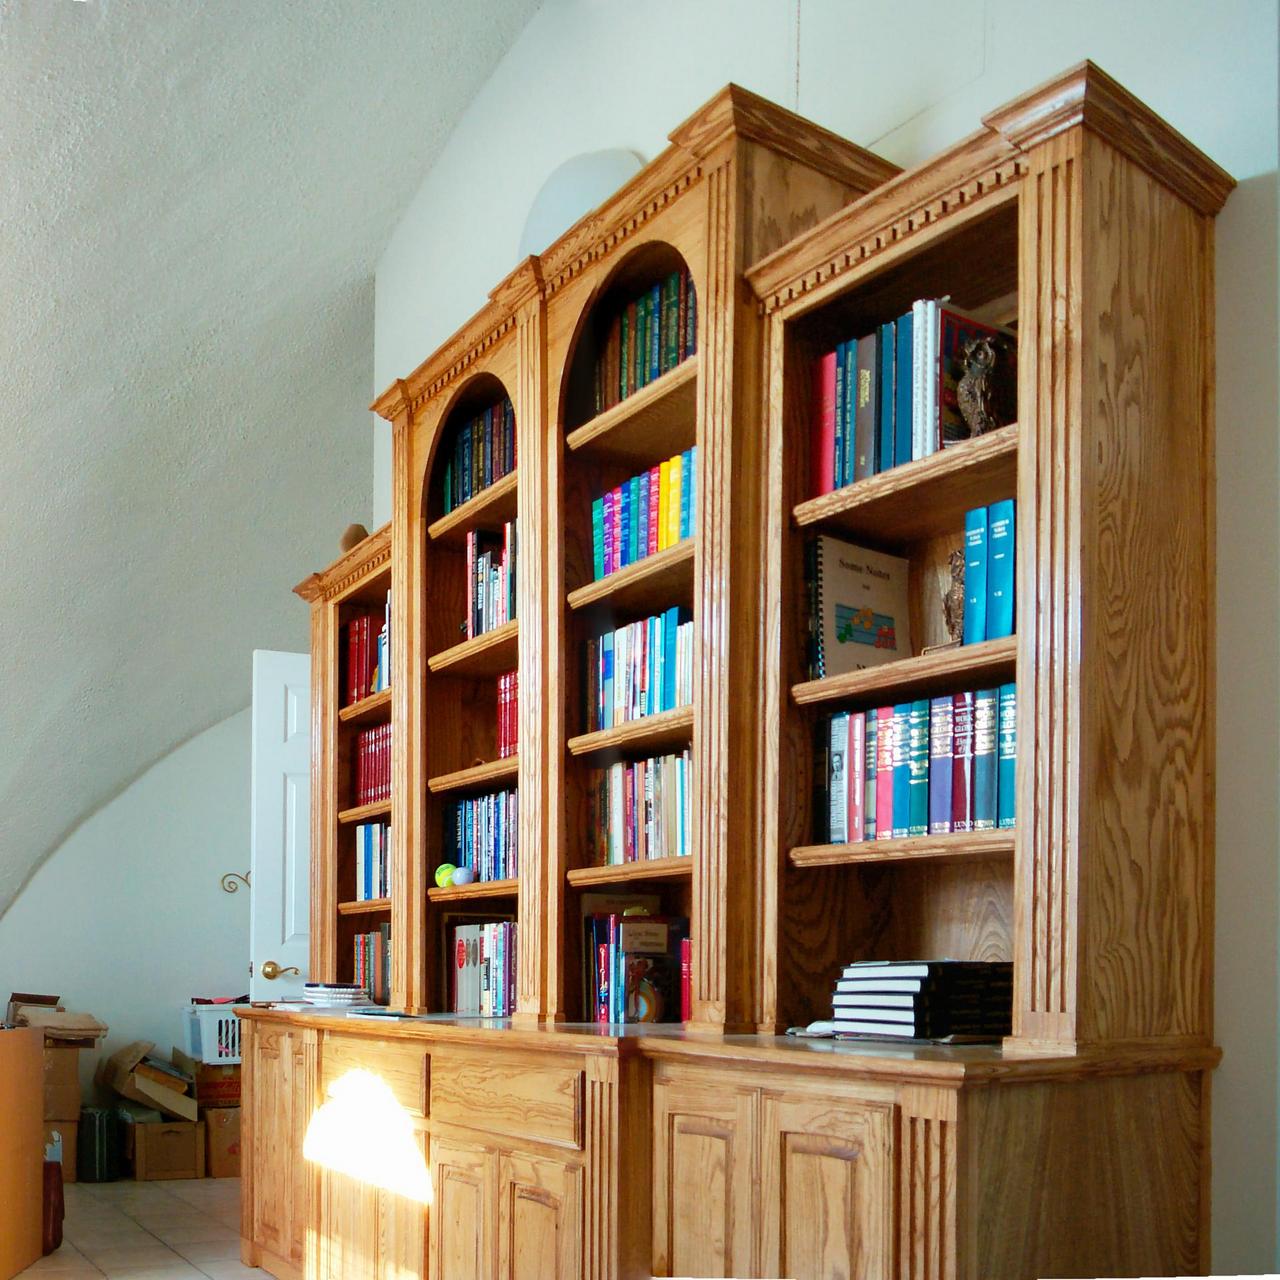 Hand crafted shelves and cabinets.